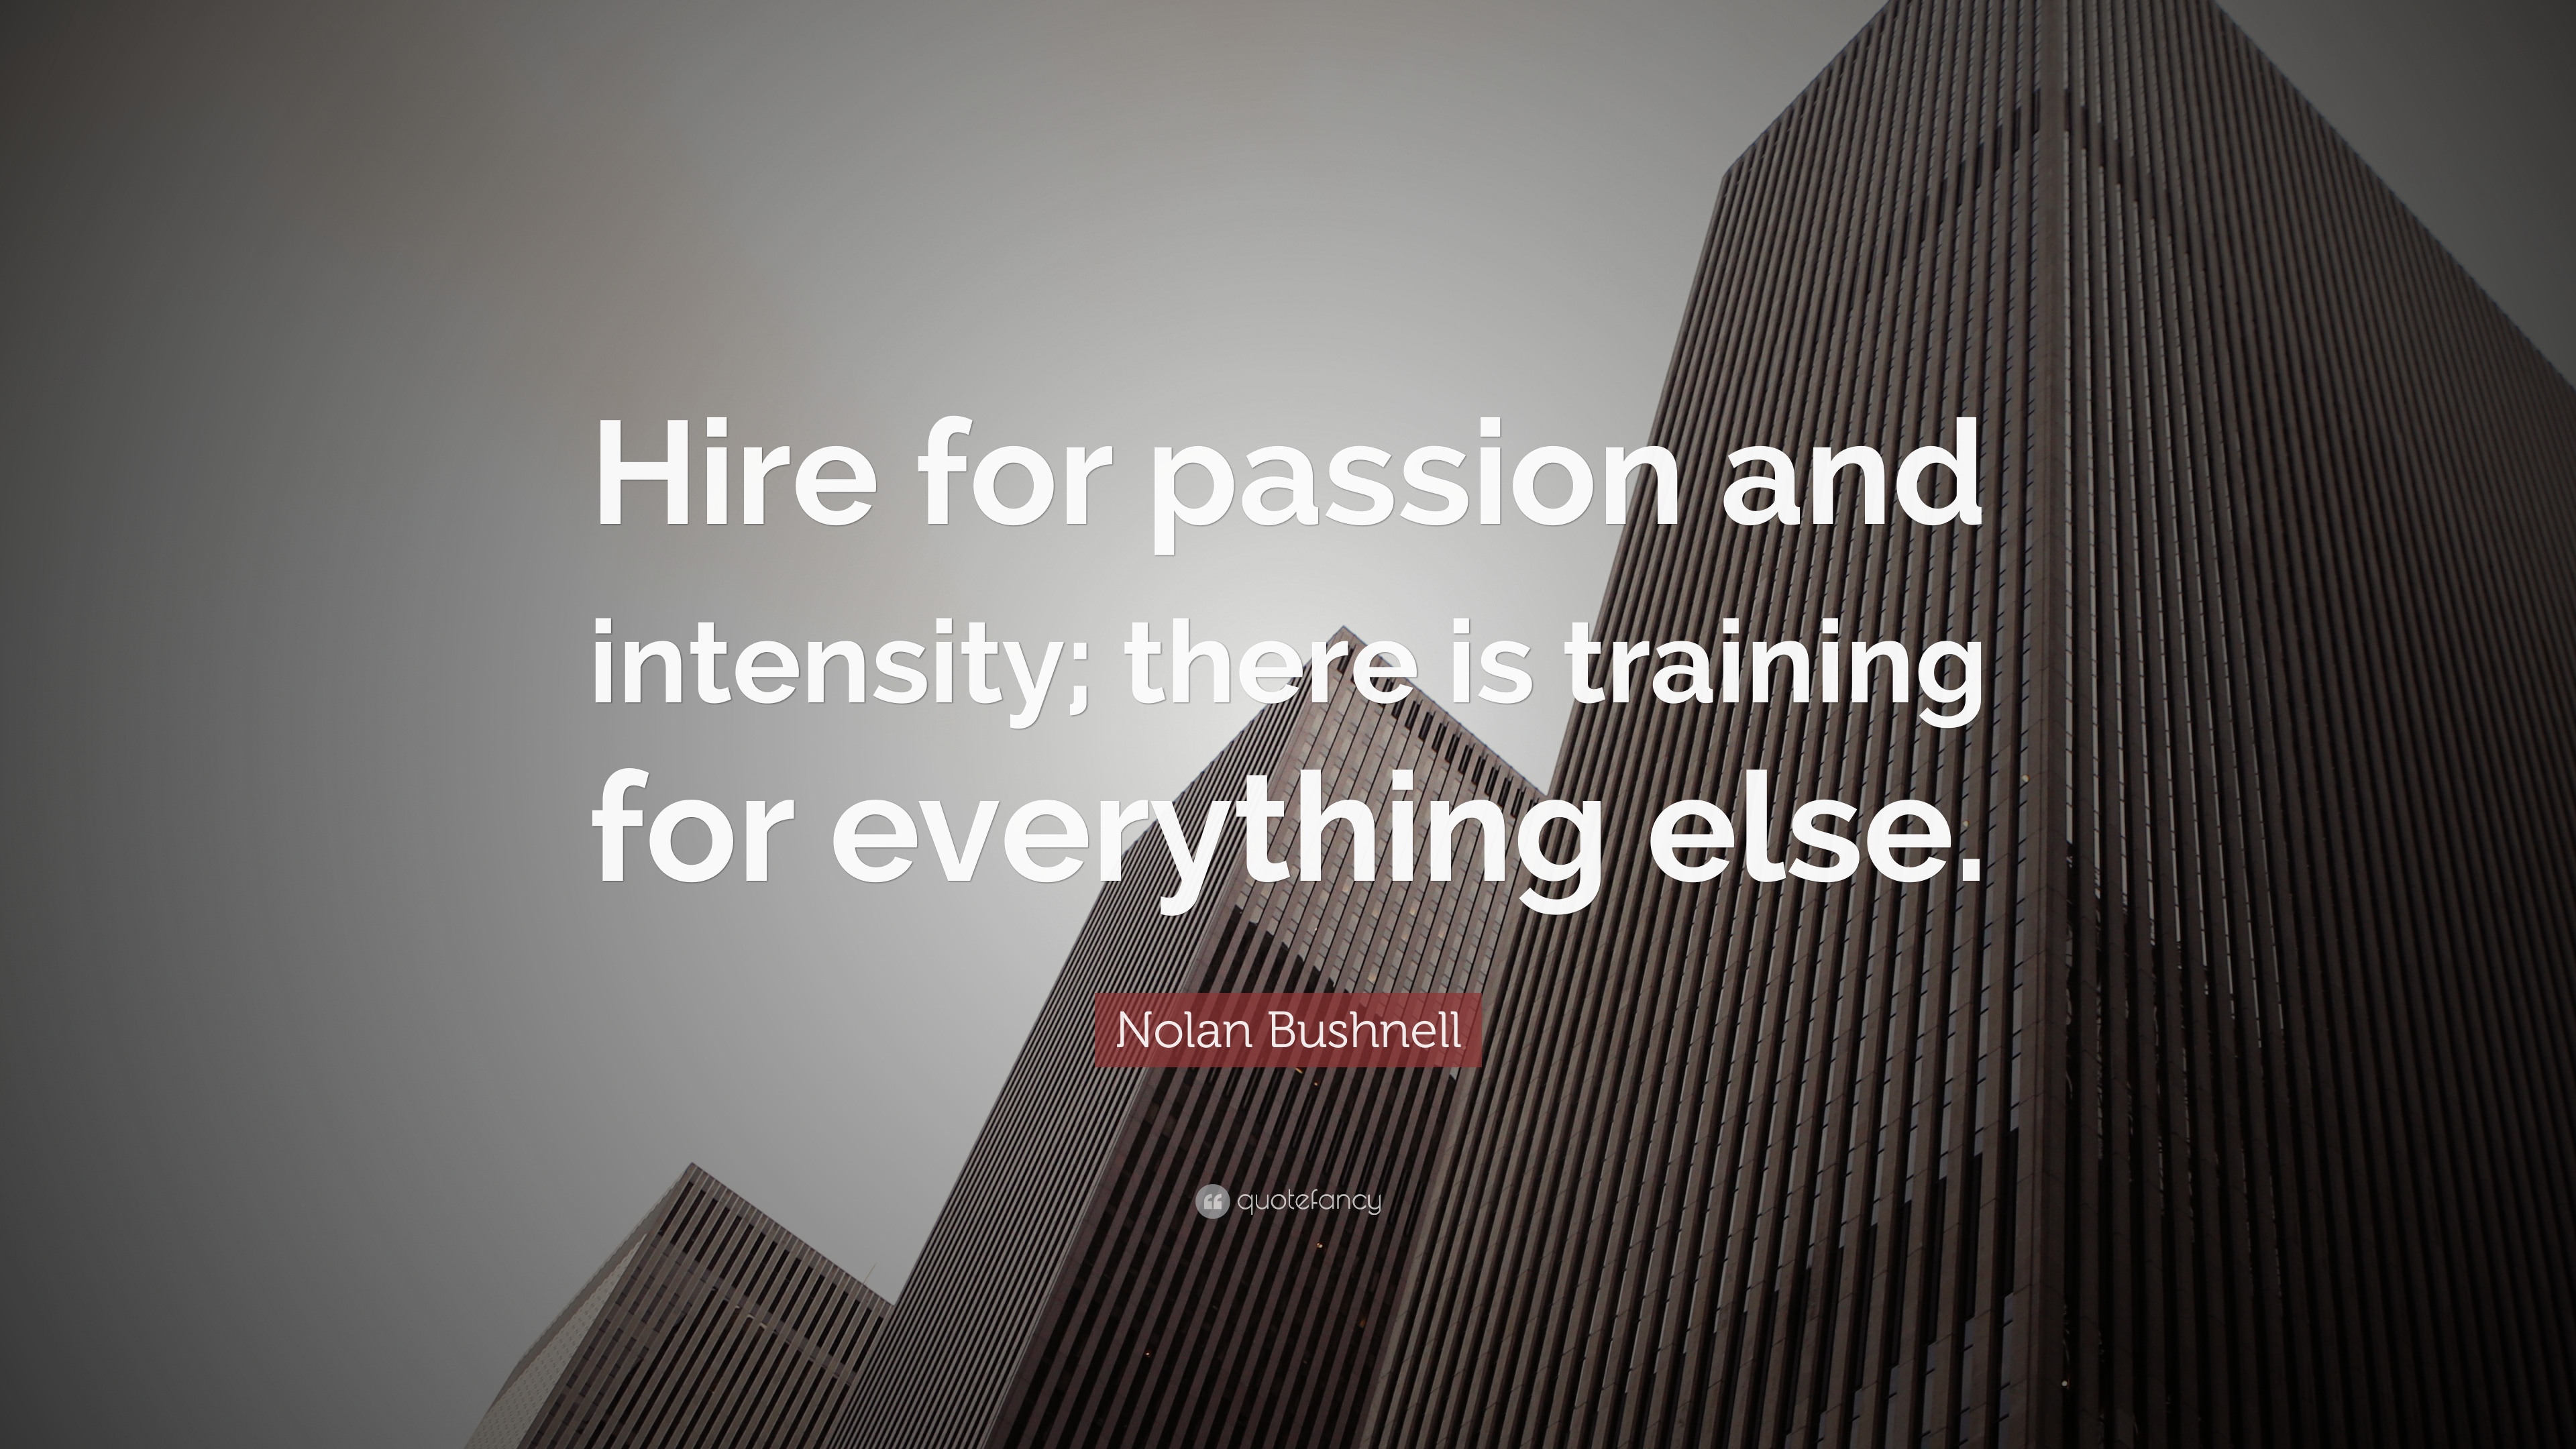 Nolan Bushnell Quote: “Hire for passion and intensity; there is